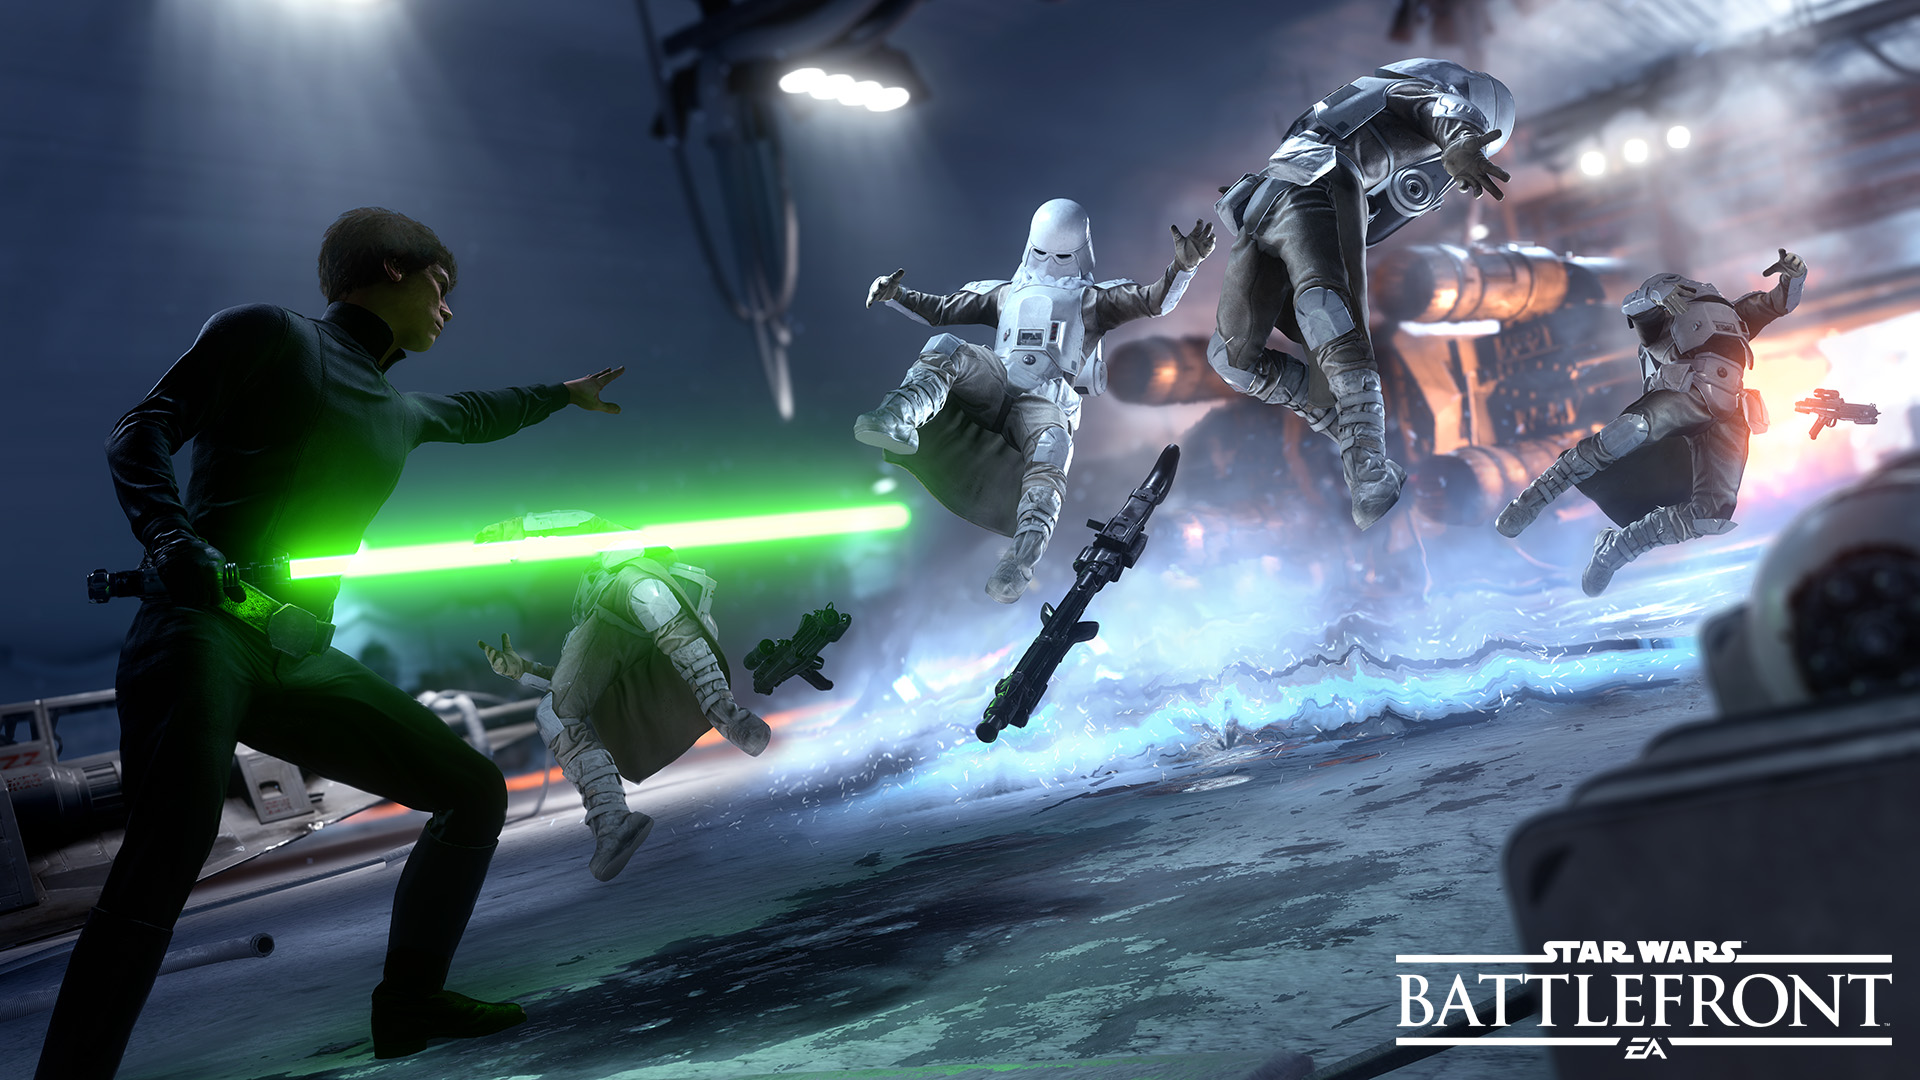 Star Wars Battlefront Themepack With HD Wallpaper